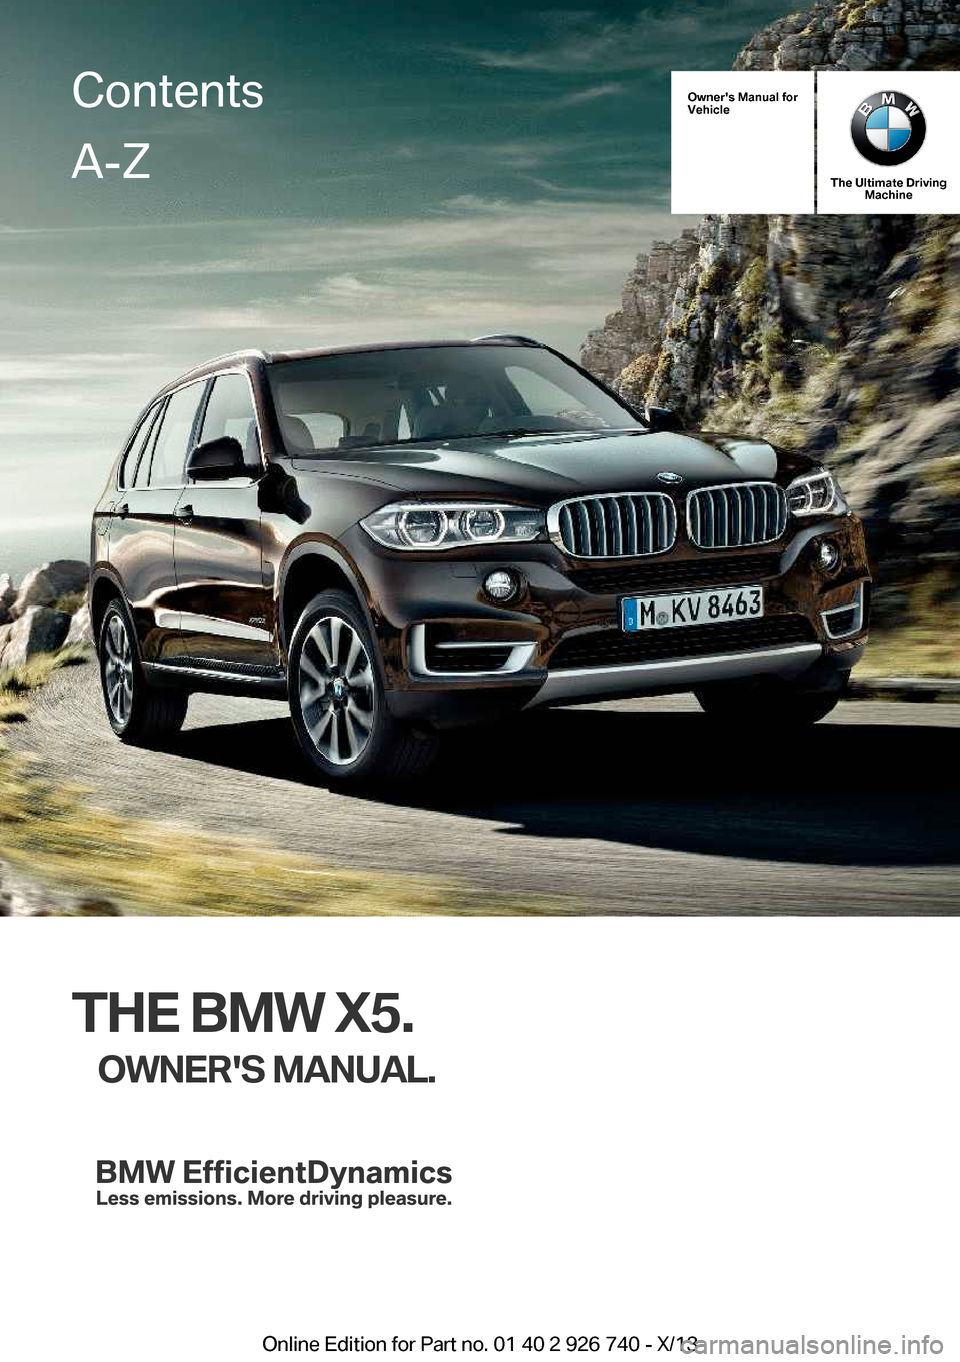 BMW X5 2014 F15 Owners Manual Owners Manual for
Vehicle
The Ultimate Driving Machine
THE BMW X5.
OWNERS MANUAL.
ContentsA-Z
Online Edition for Part no. 01 40 2 926 740 - X/13   